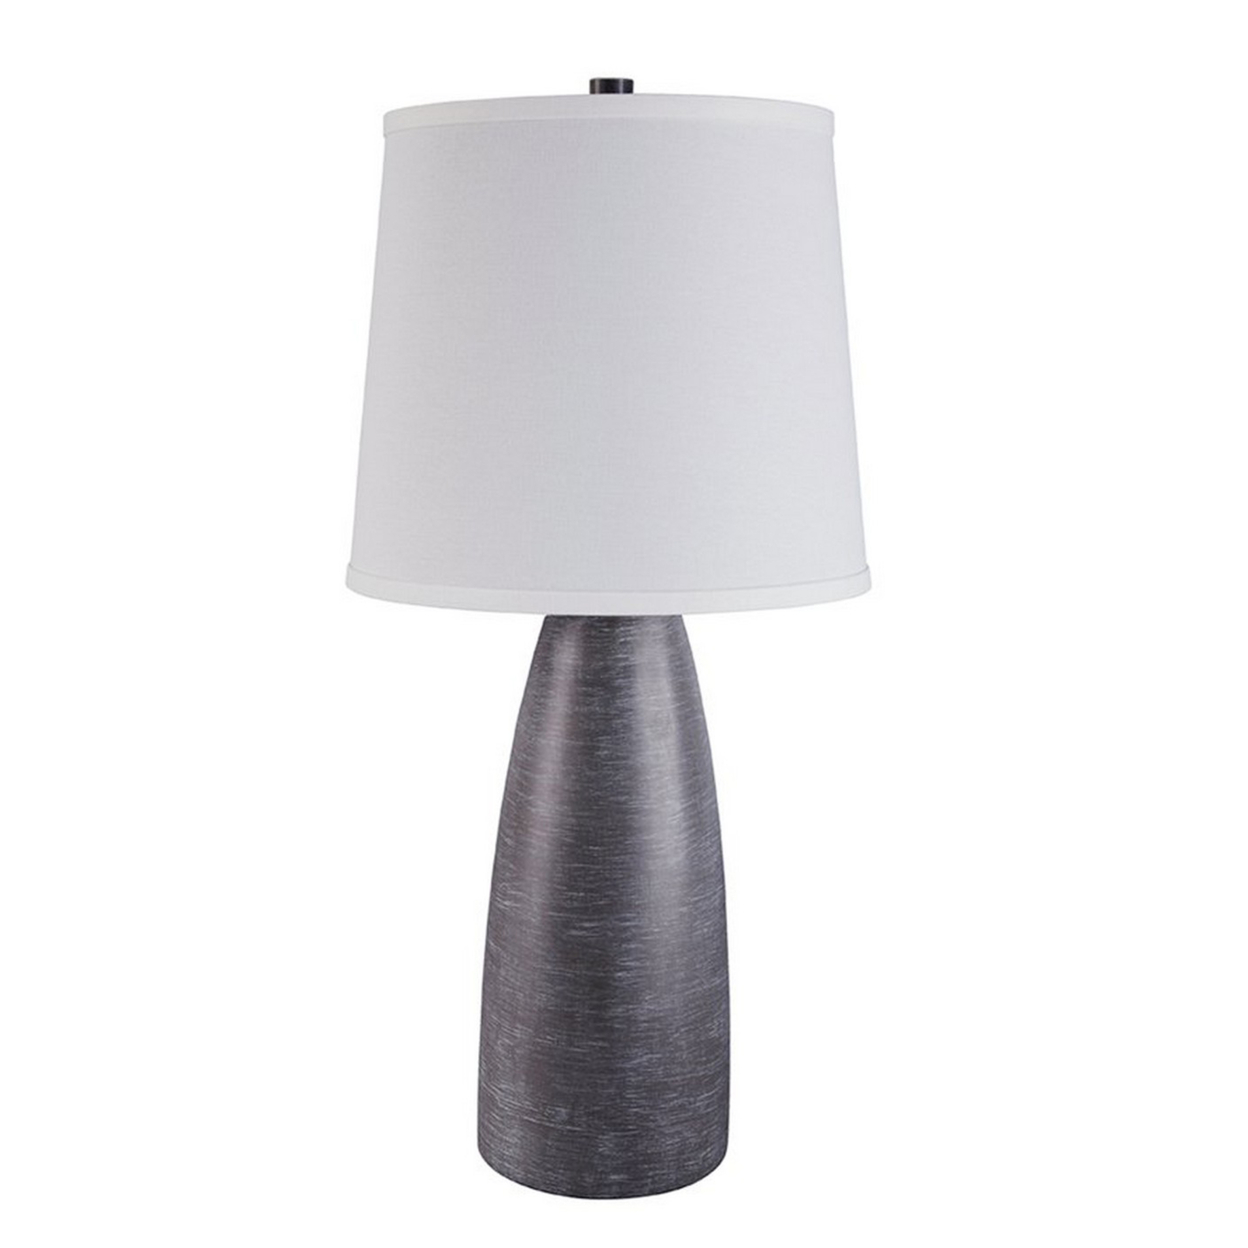 Vase Shape Resin Table Lamp With Fabric Shade, Set Of 2, Gray And White- Saltoro Sherpi